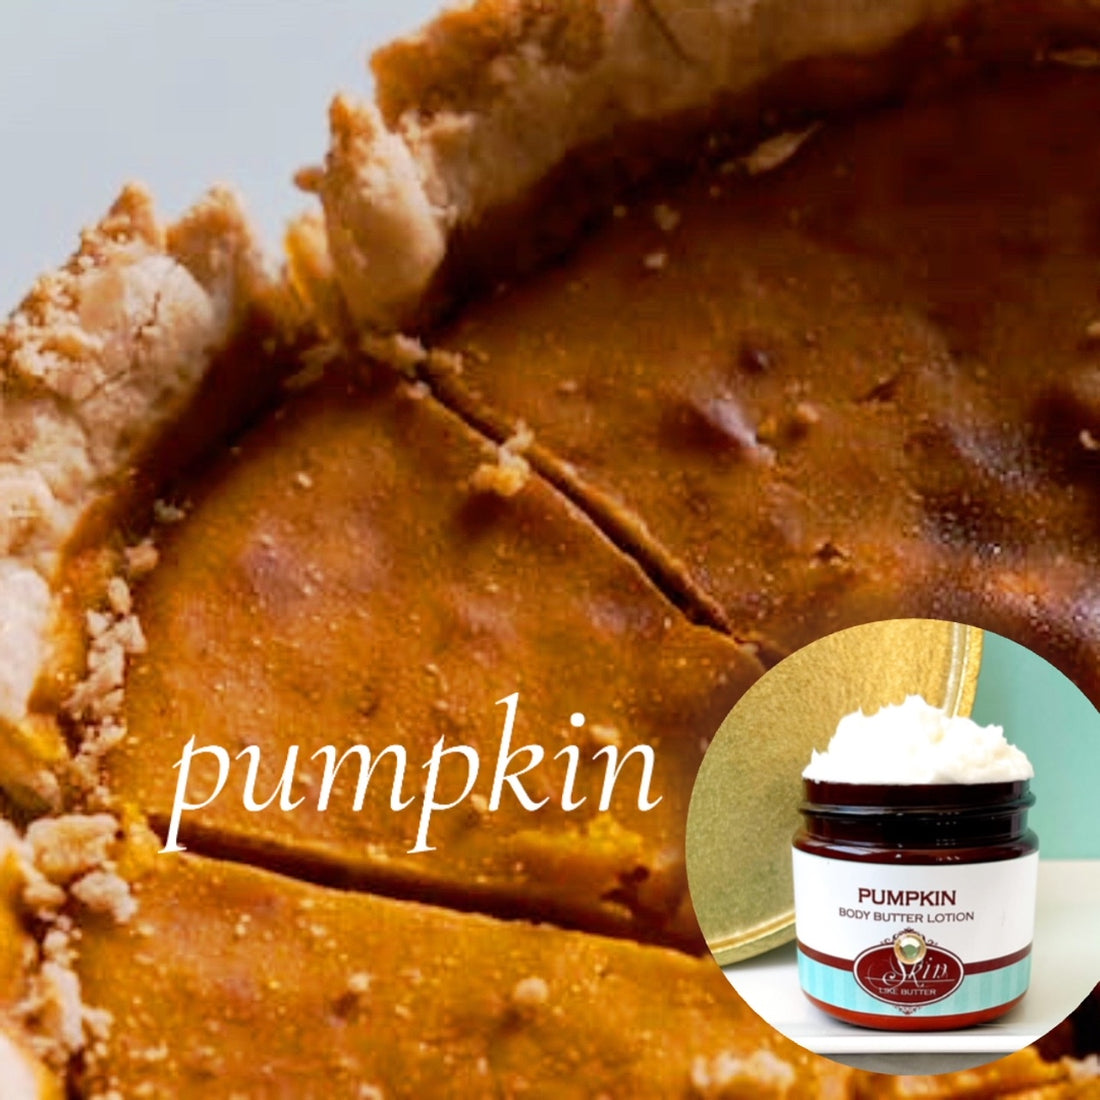 PUMPKIN scented Body Butter, waterfree and non-greasy, vegan